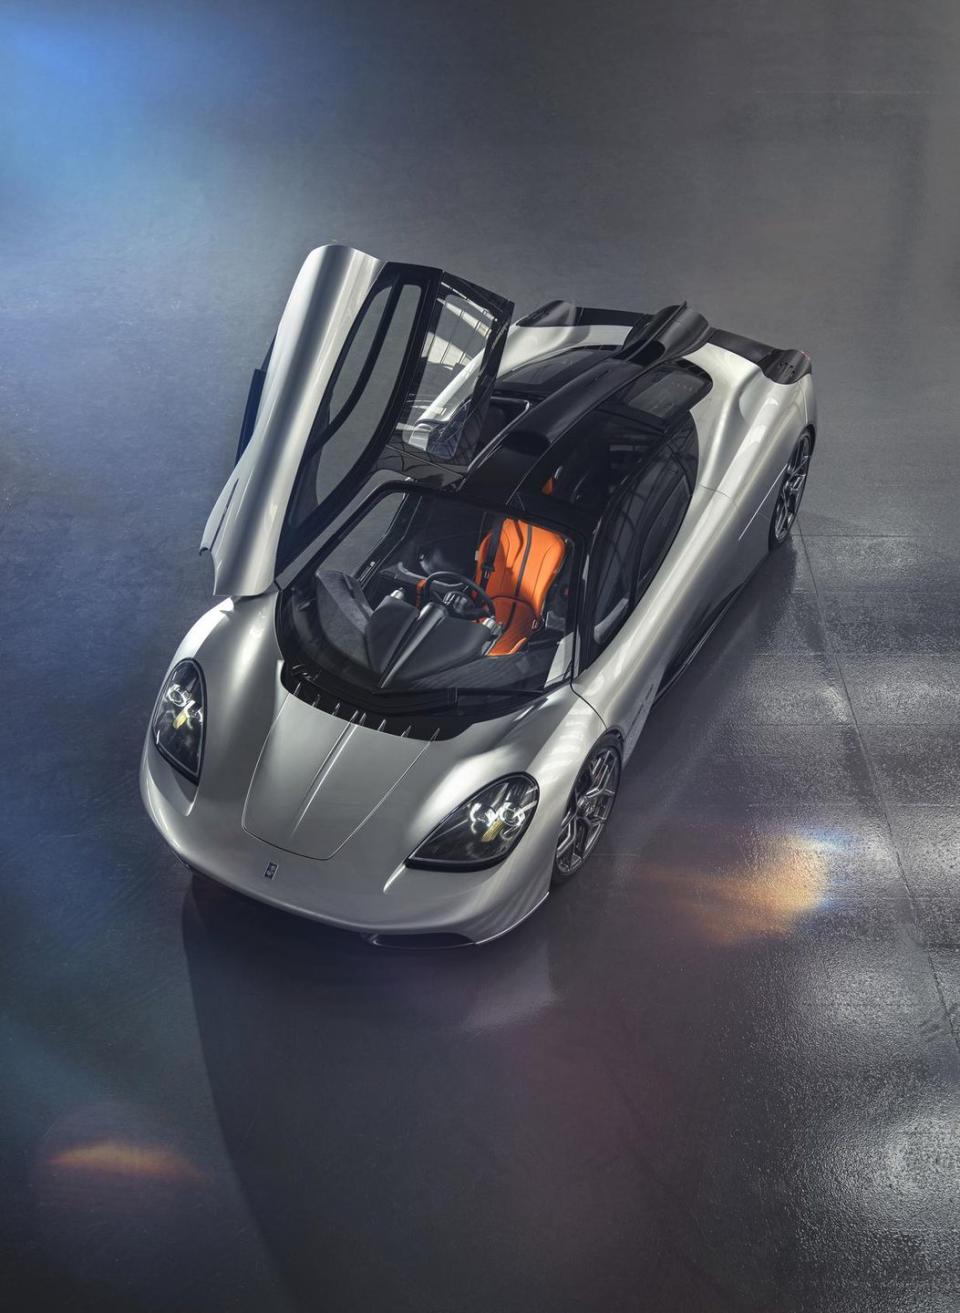 <p>The T.50 is essentially a modern interpretation of the McLaren F1. It uses the same mid-engine layout, the same swing-up butterfly doors, and the same drivetrain configuration. It's just modernized to be an even more pure driving experience. </p>